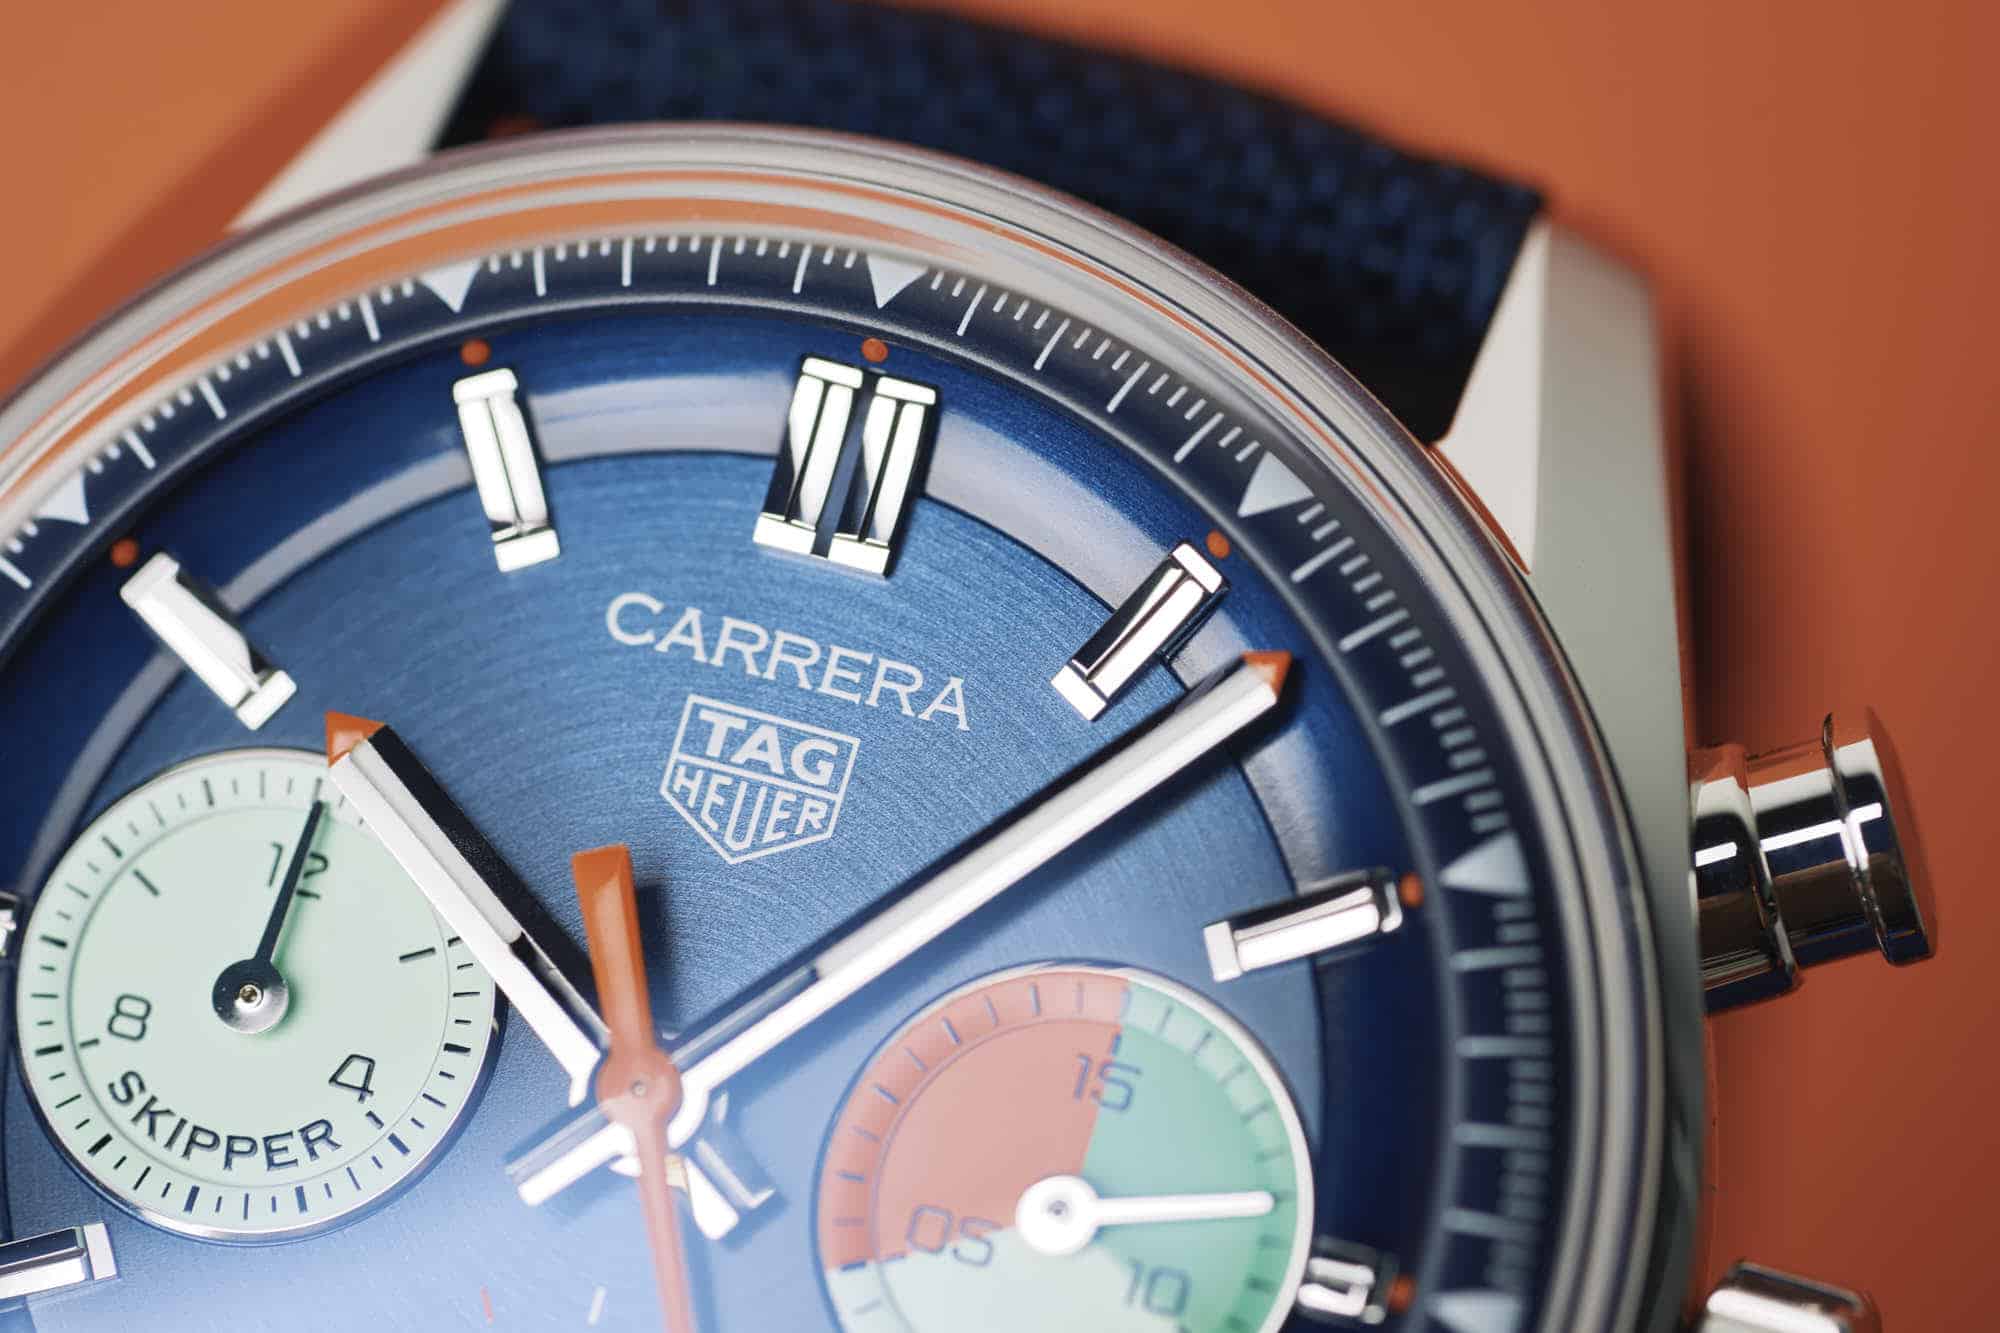 HANDS-ON: The new TAG Heuer Carerra Skipper merges the coveted